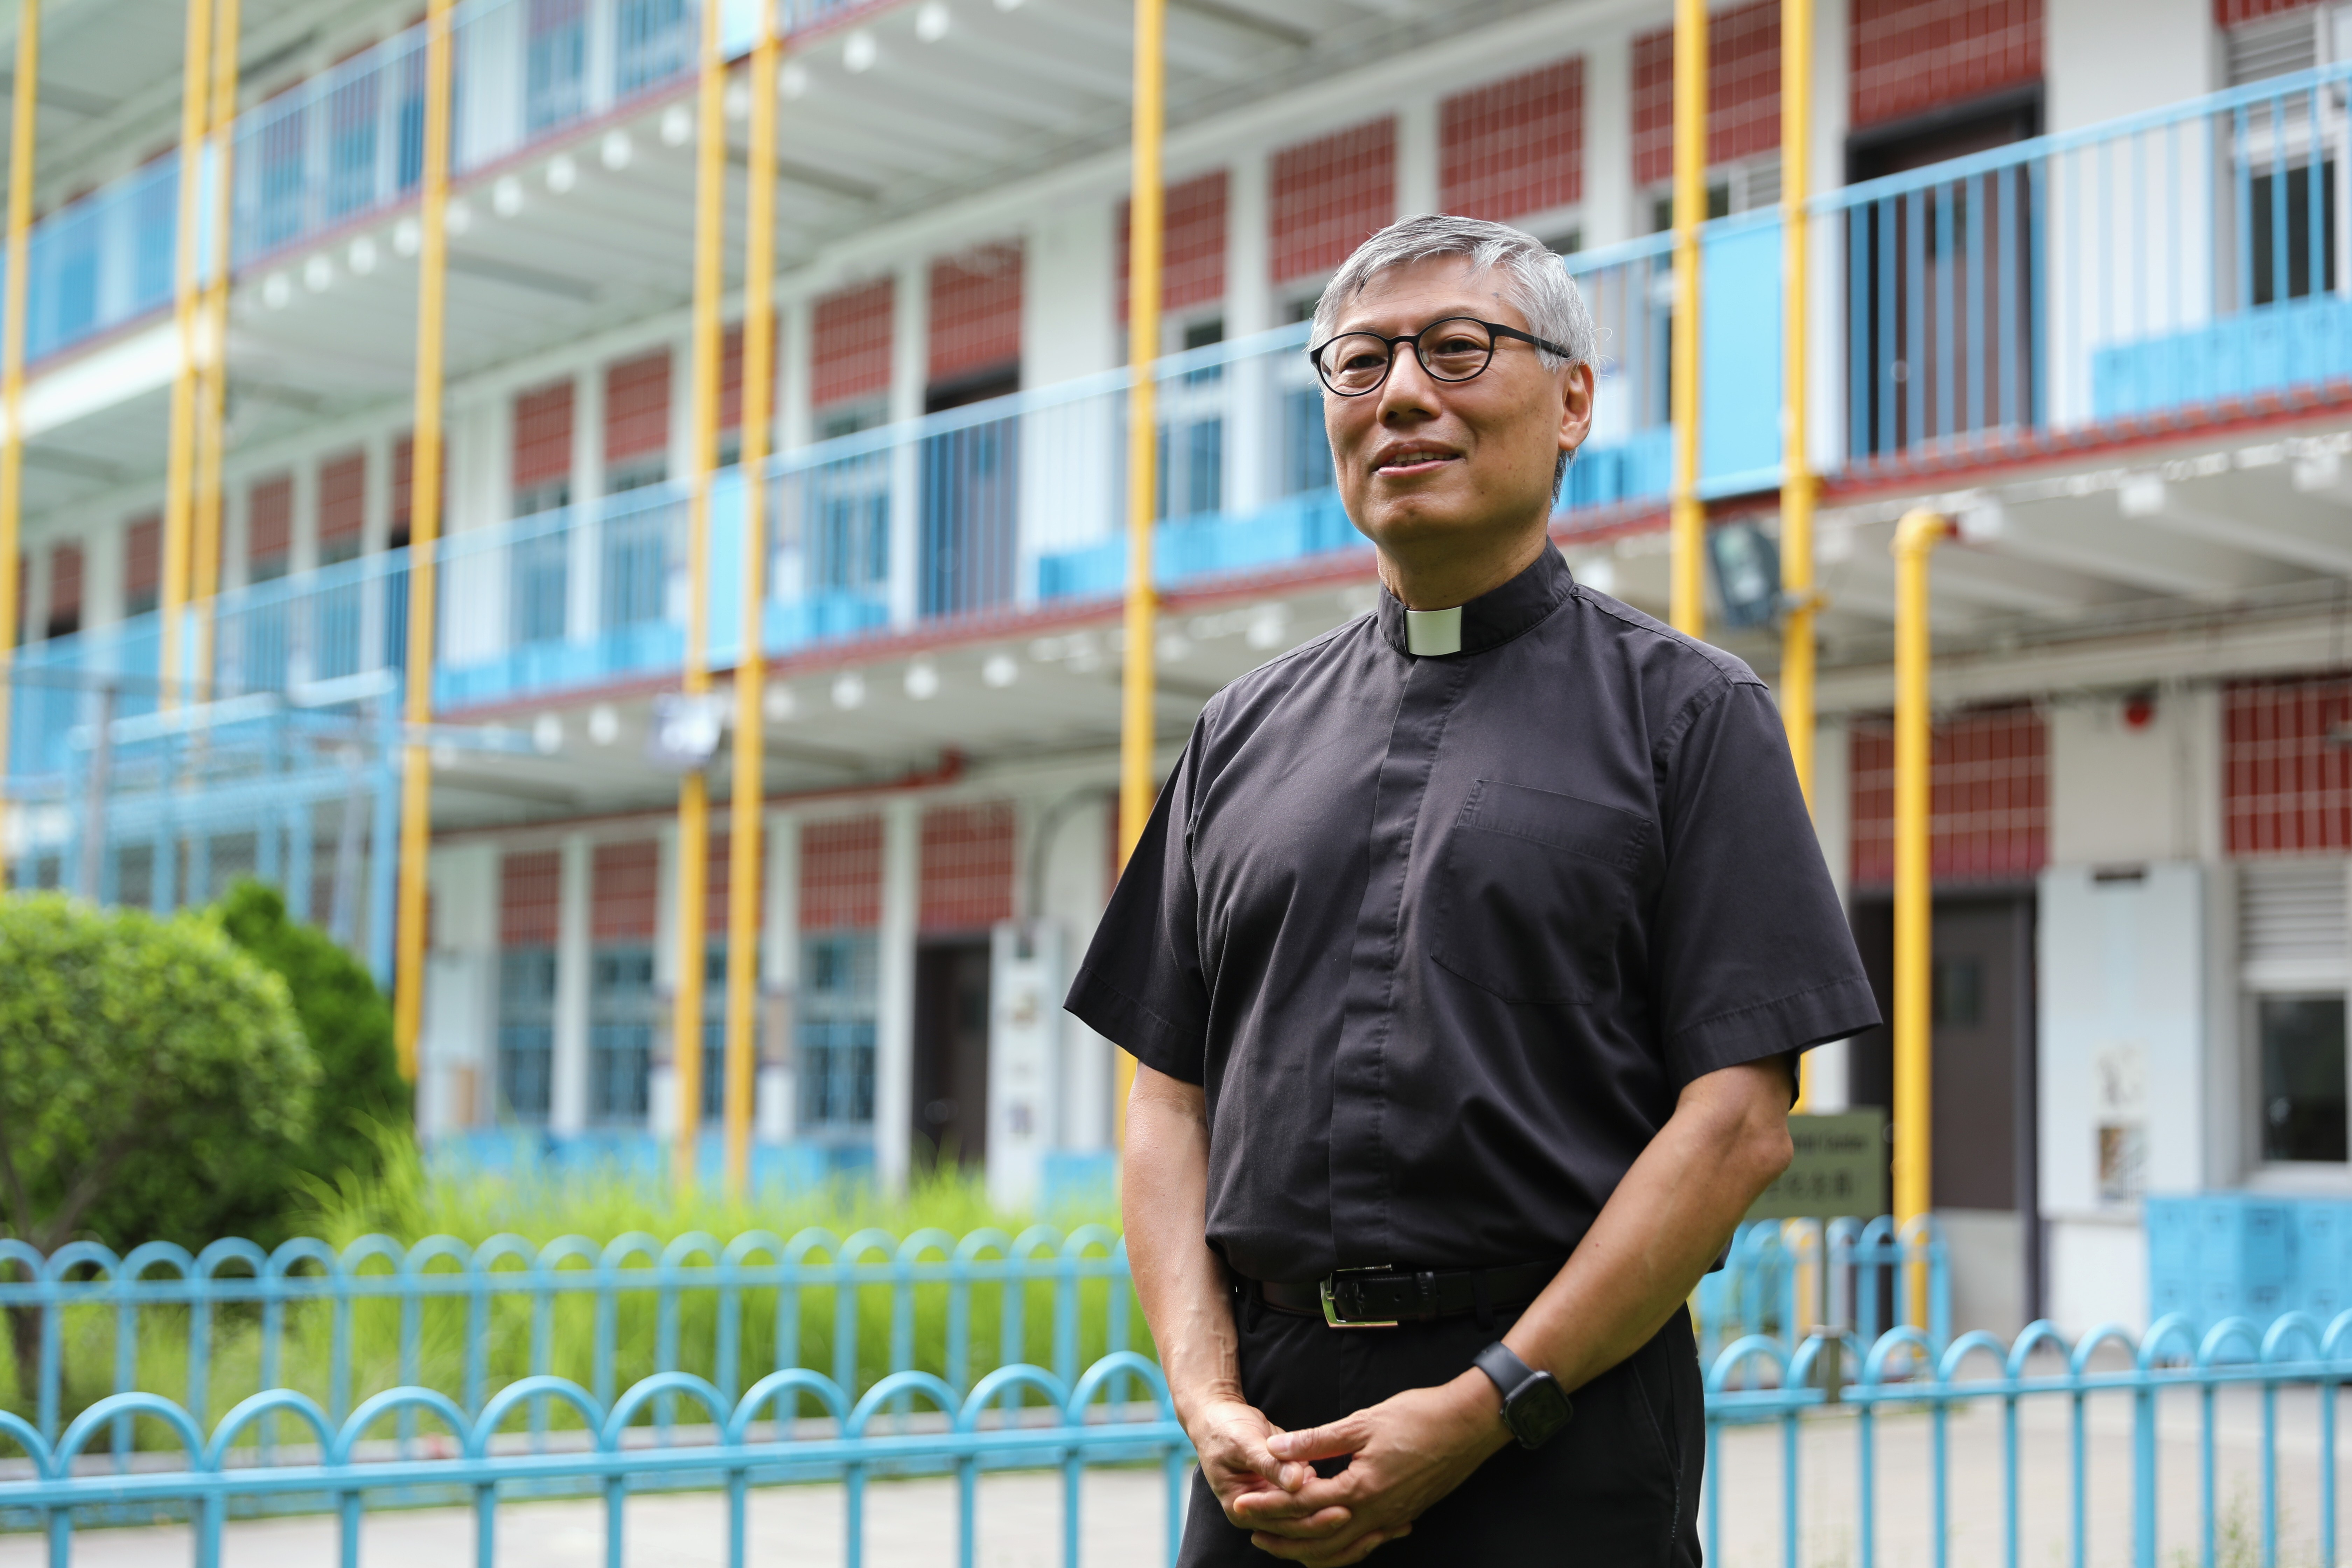 Bishop-elect Stephen Chow, 62, is seen as a prudent choice to lead Hong Kong’s polarised Catholic community. Photo: Nora Tam